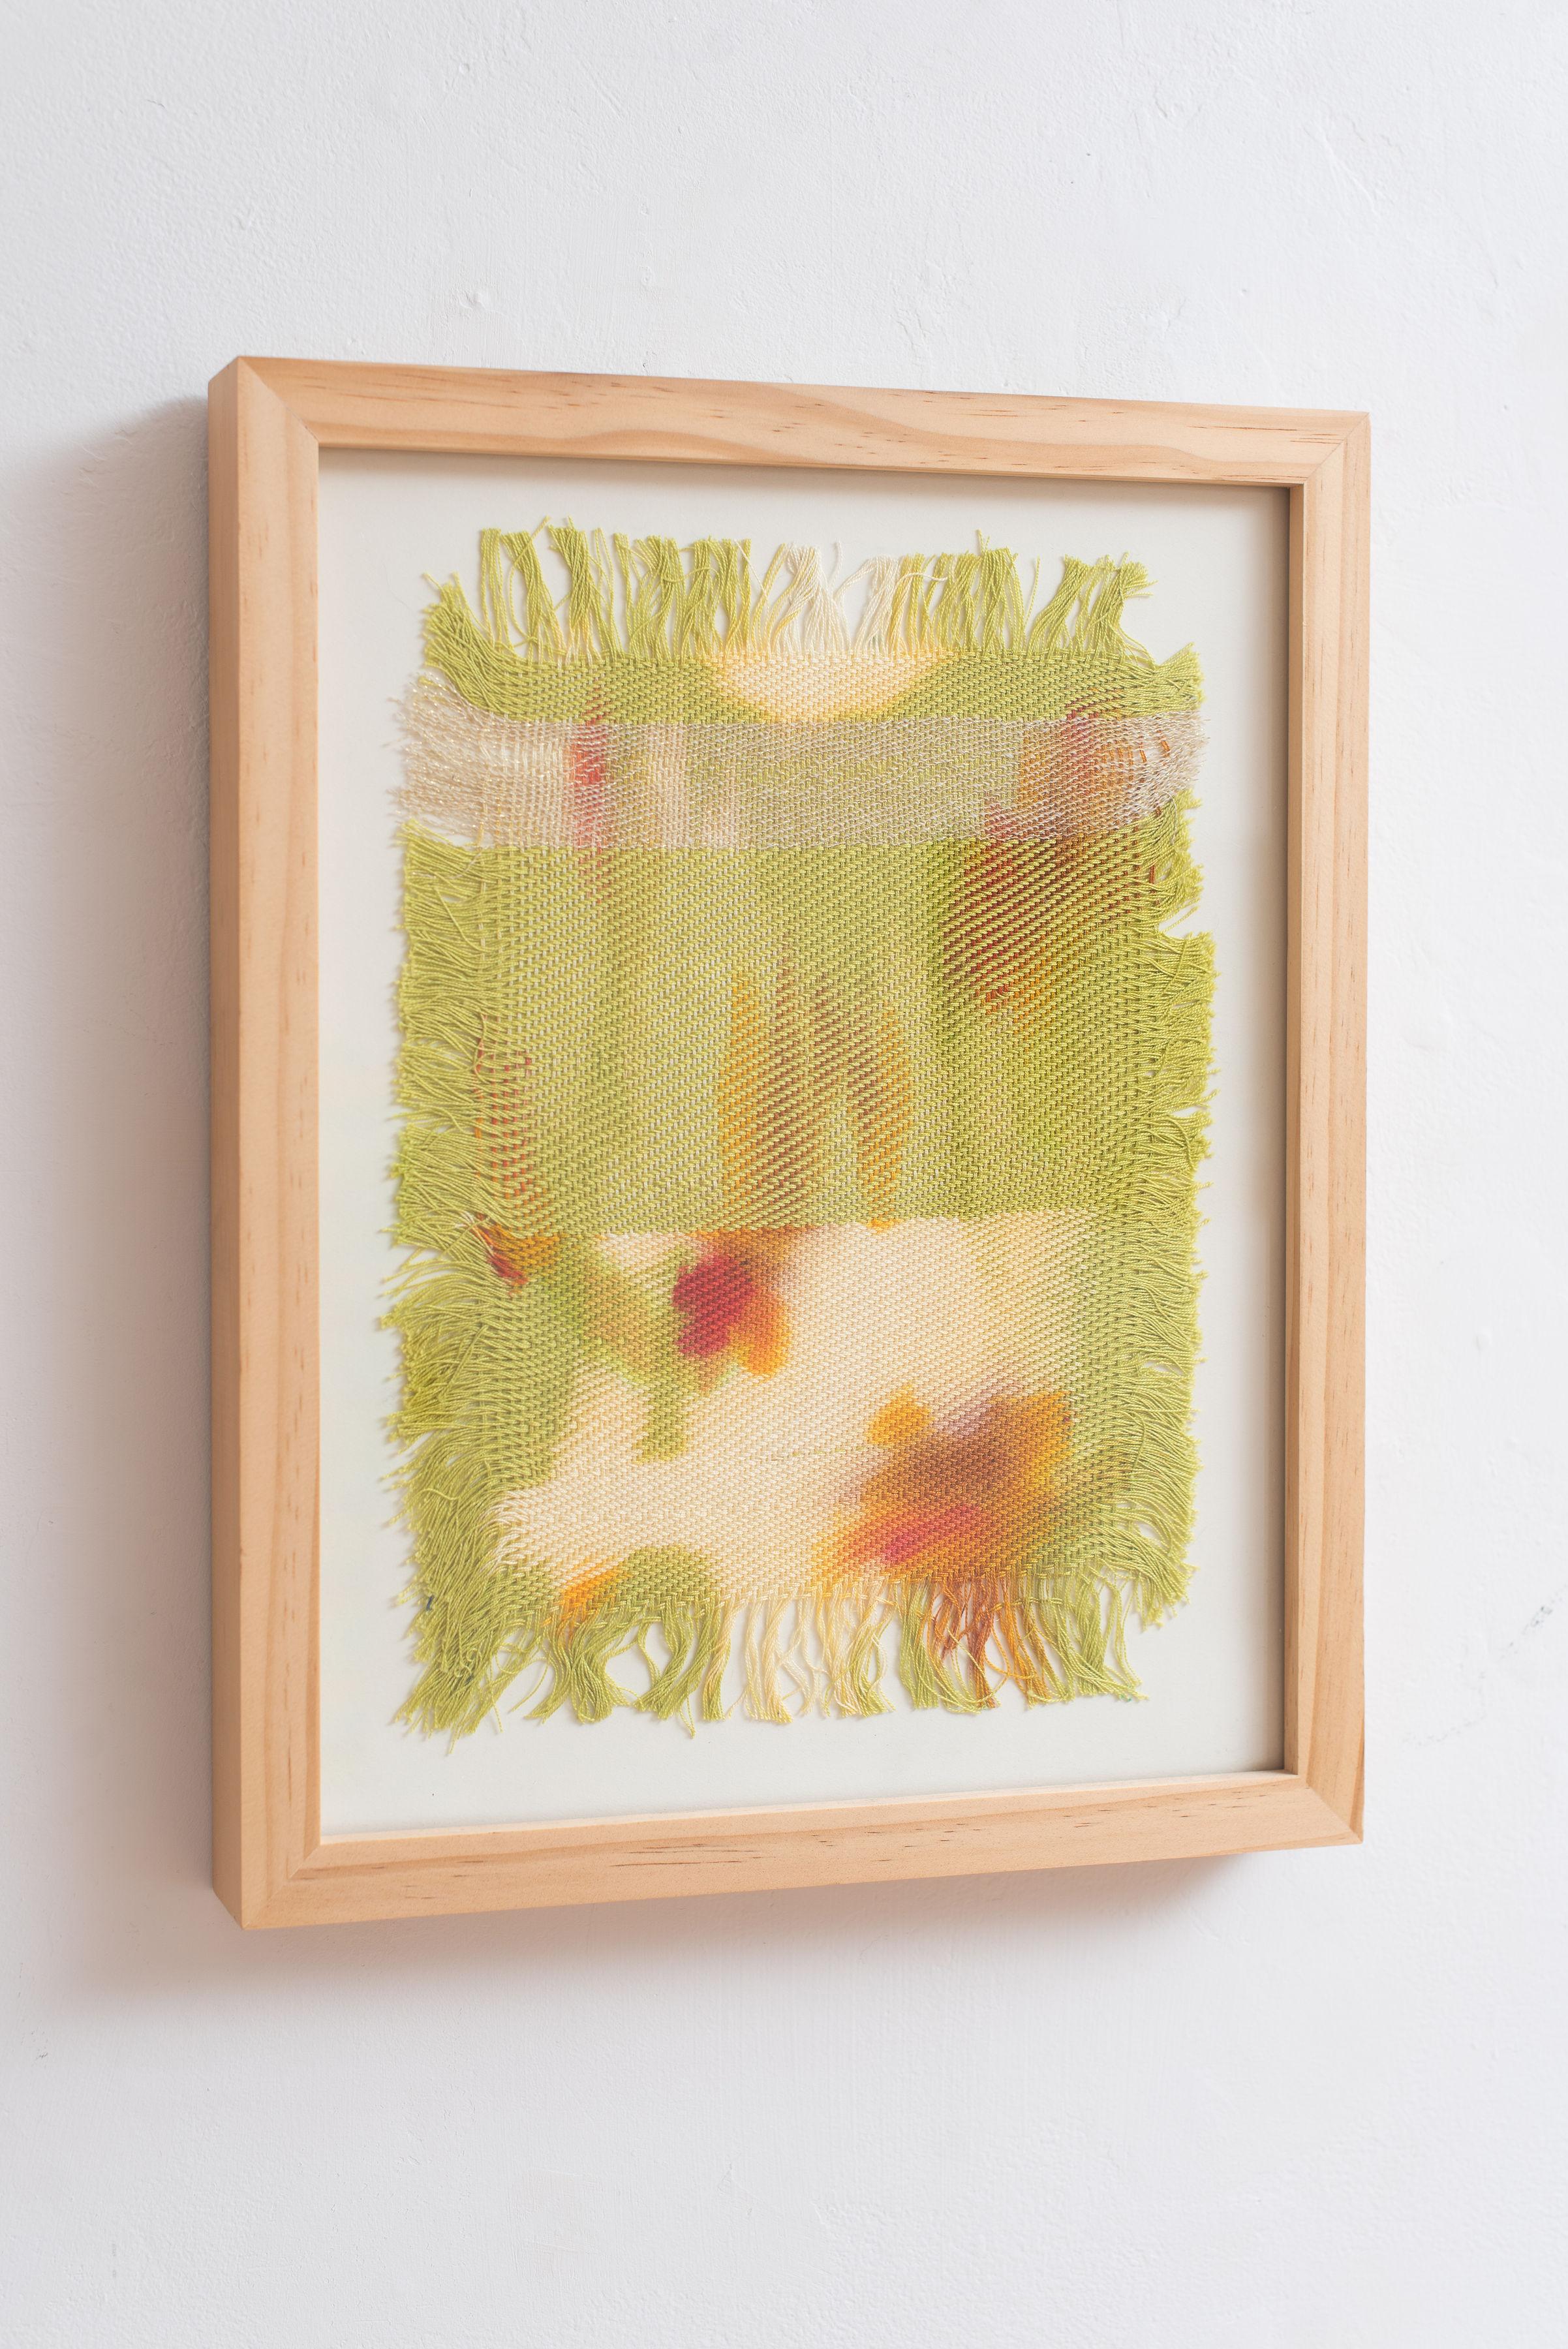 Untitled #91
Natural and Synthetic Fiber and Dye
13.25 x 8.75 in

Recently on view in our exhibition, 